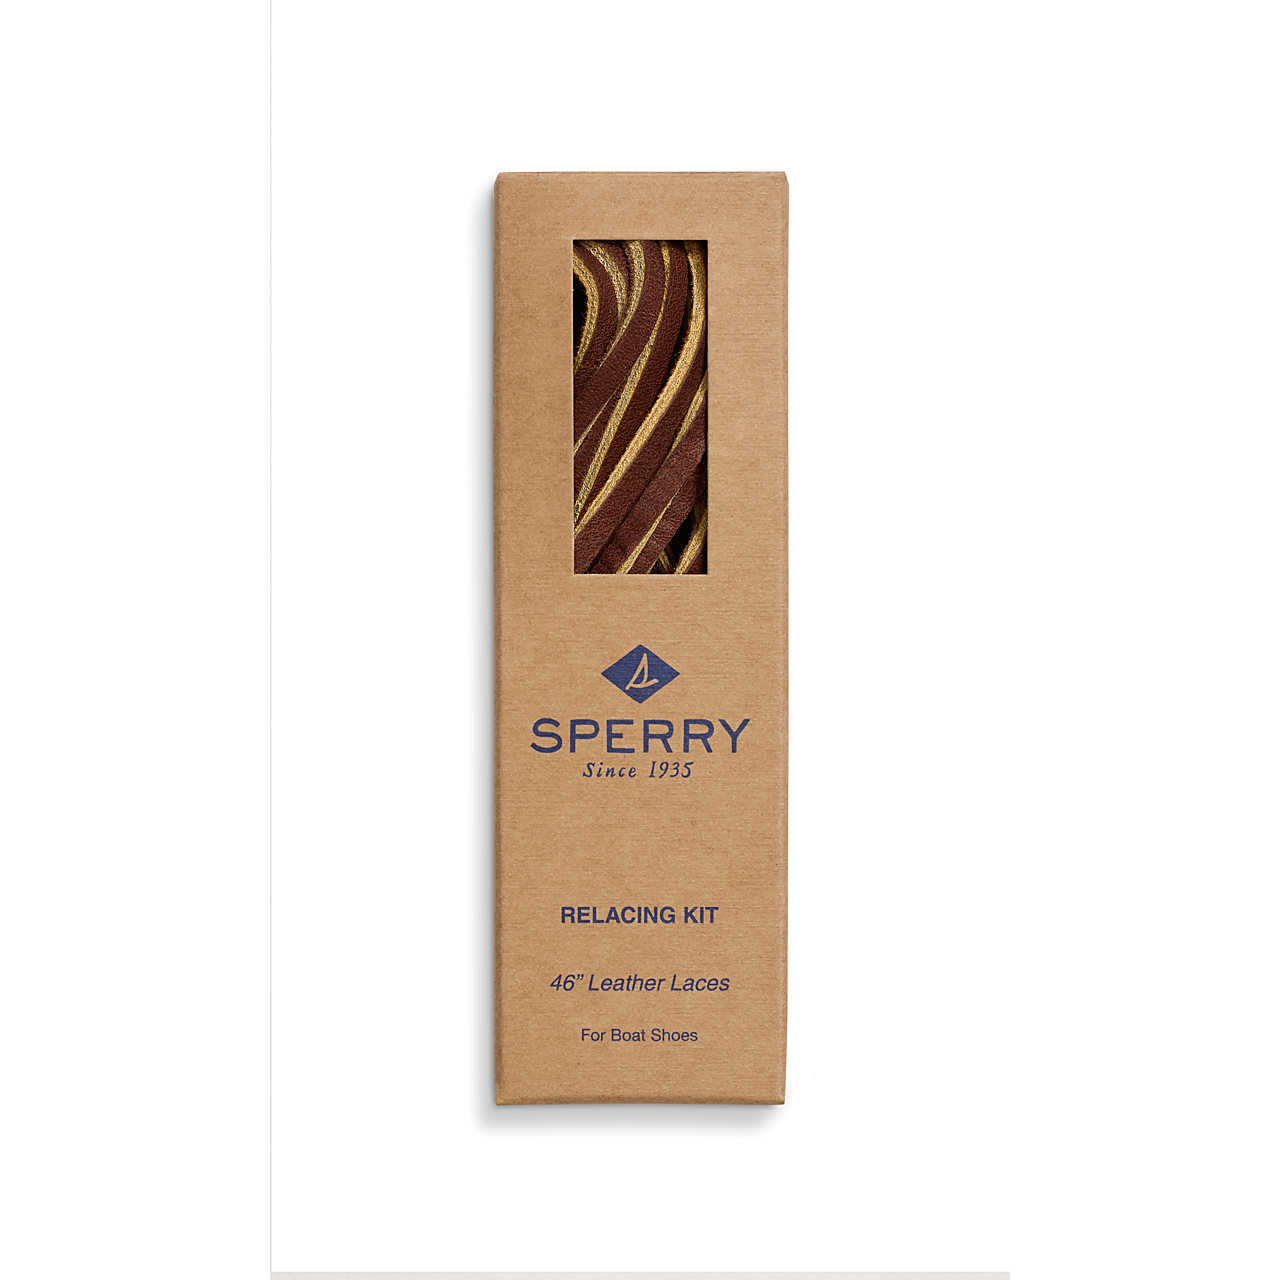 Sperry 46 Leather Laces Relacing Kit For Boat Shoes~COLOR: Peach Blow NIB